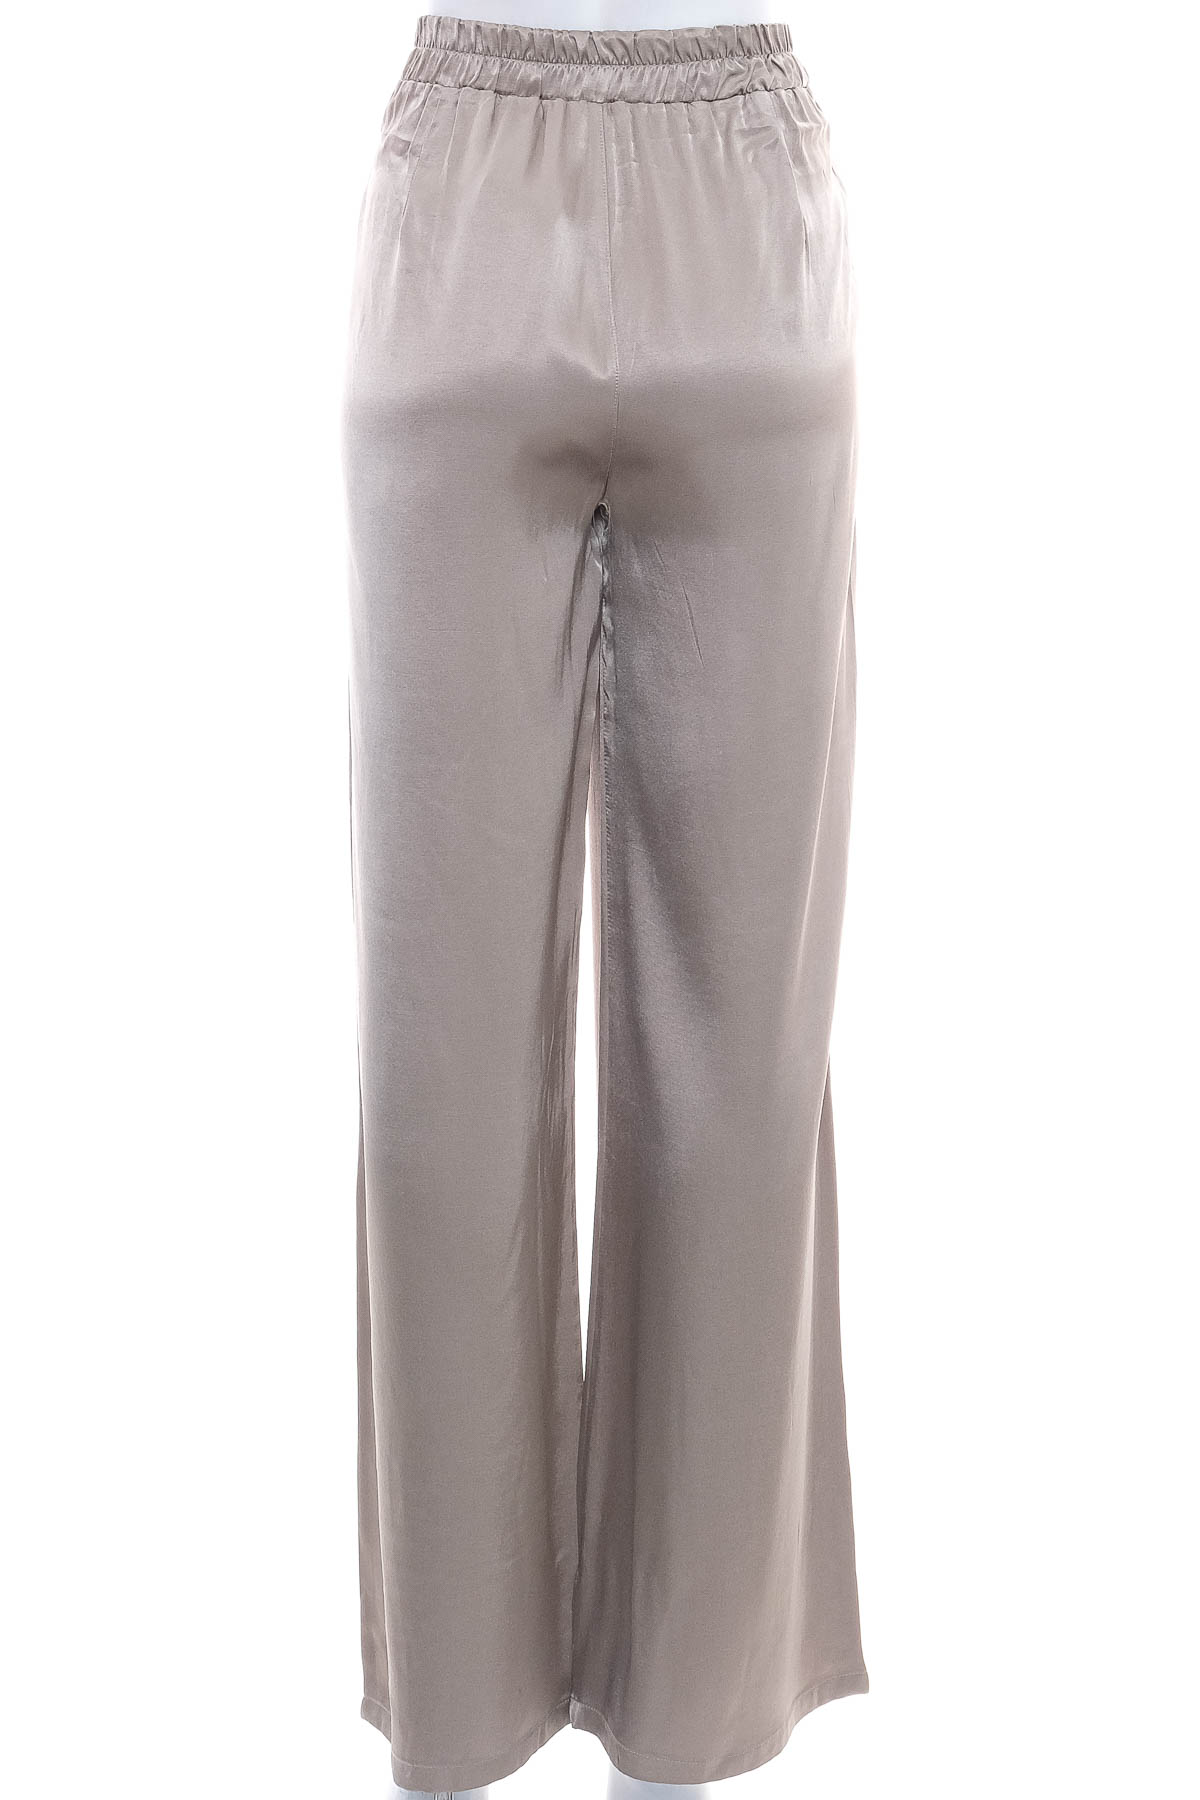 Women's trousers - More & More - 1